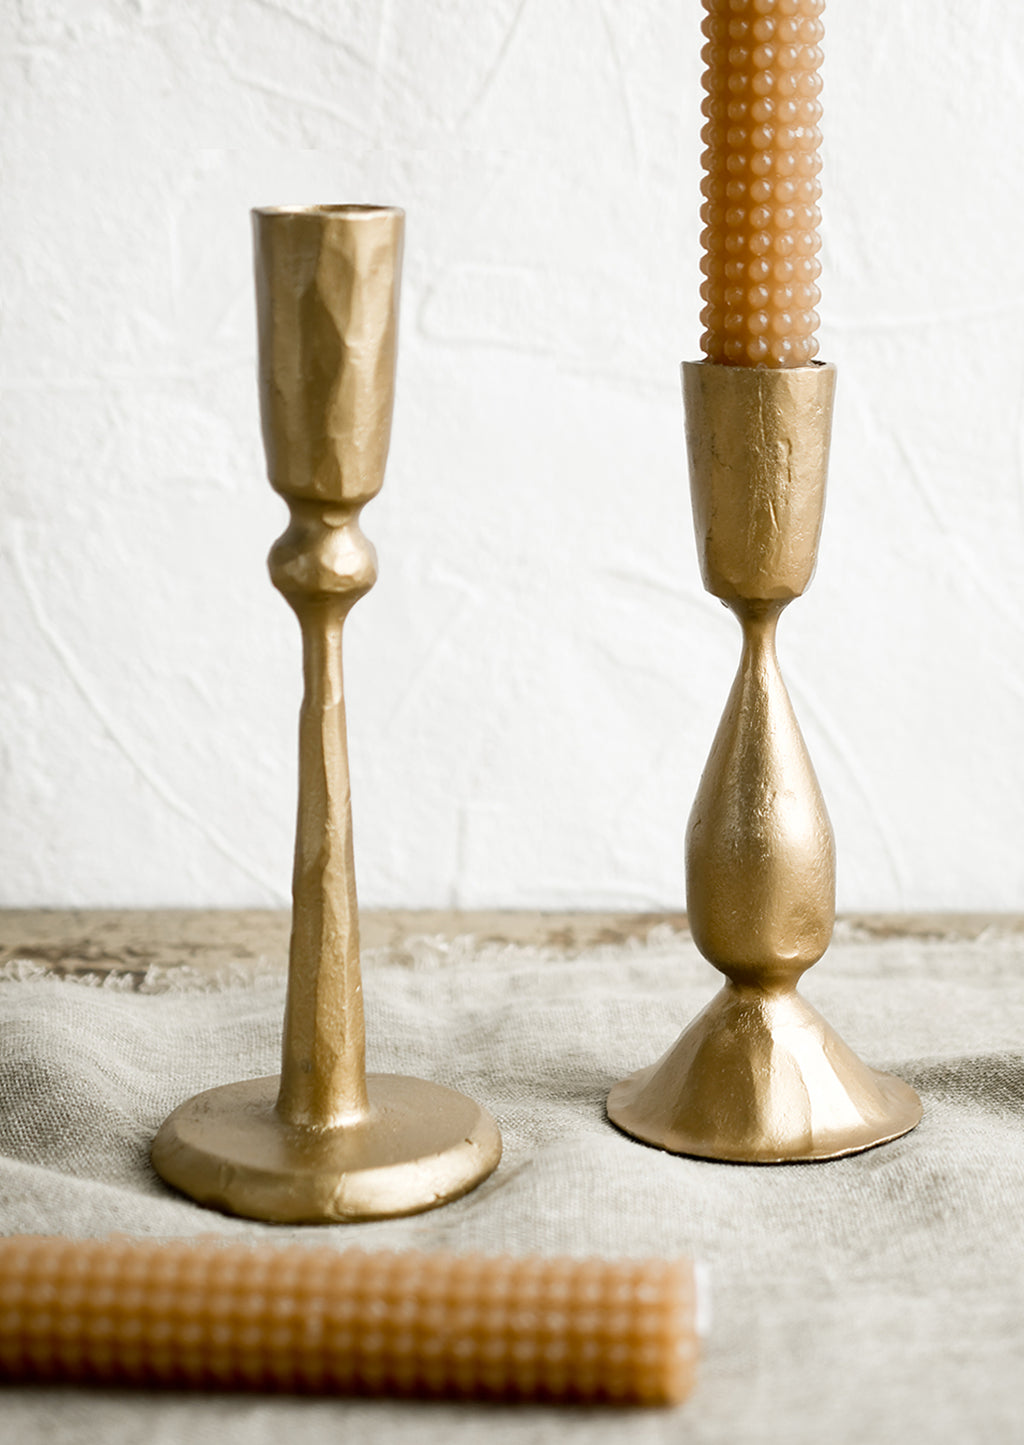 3: Golden metal candlestick holders with hobtail taper candles.